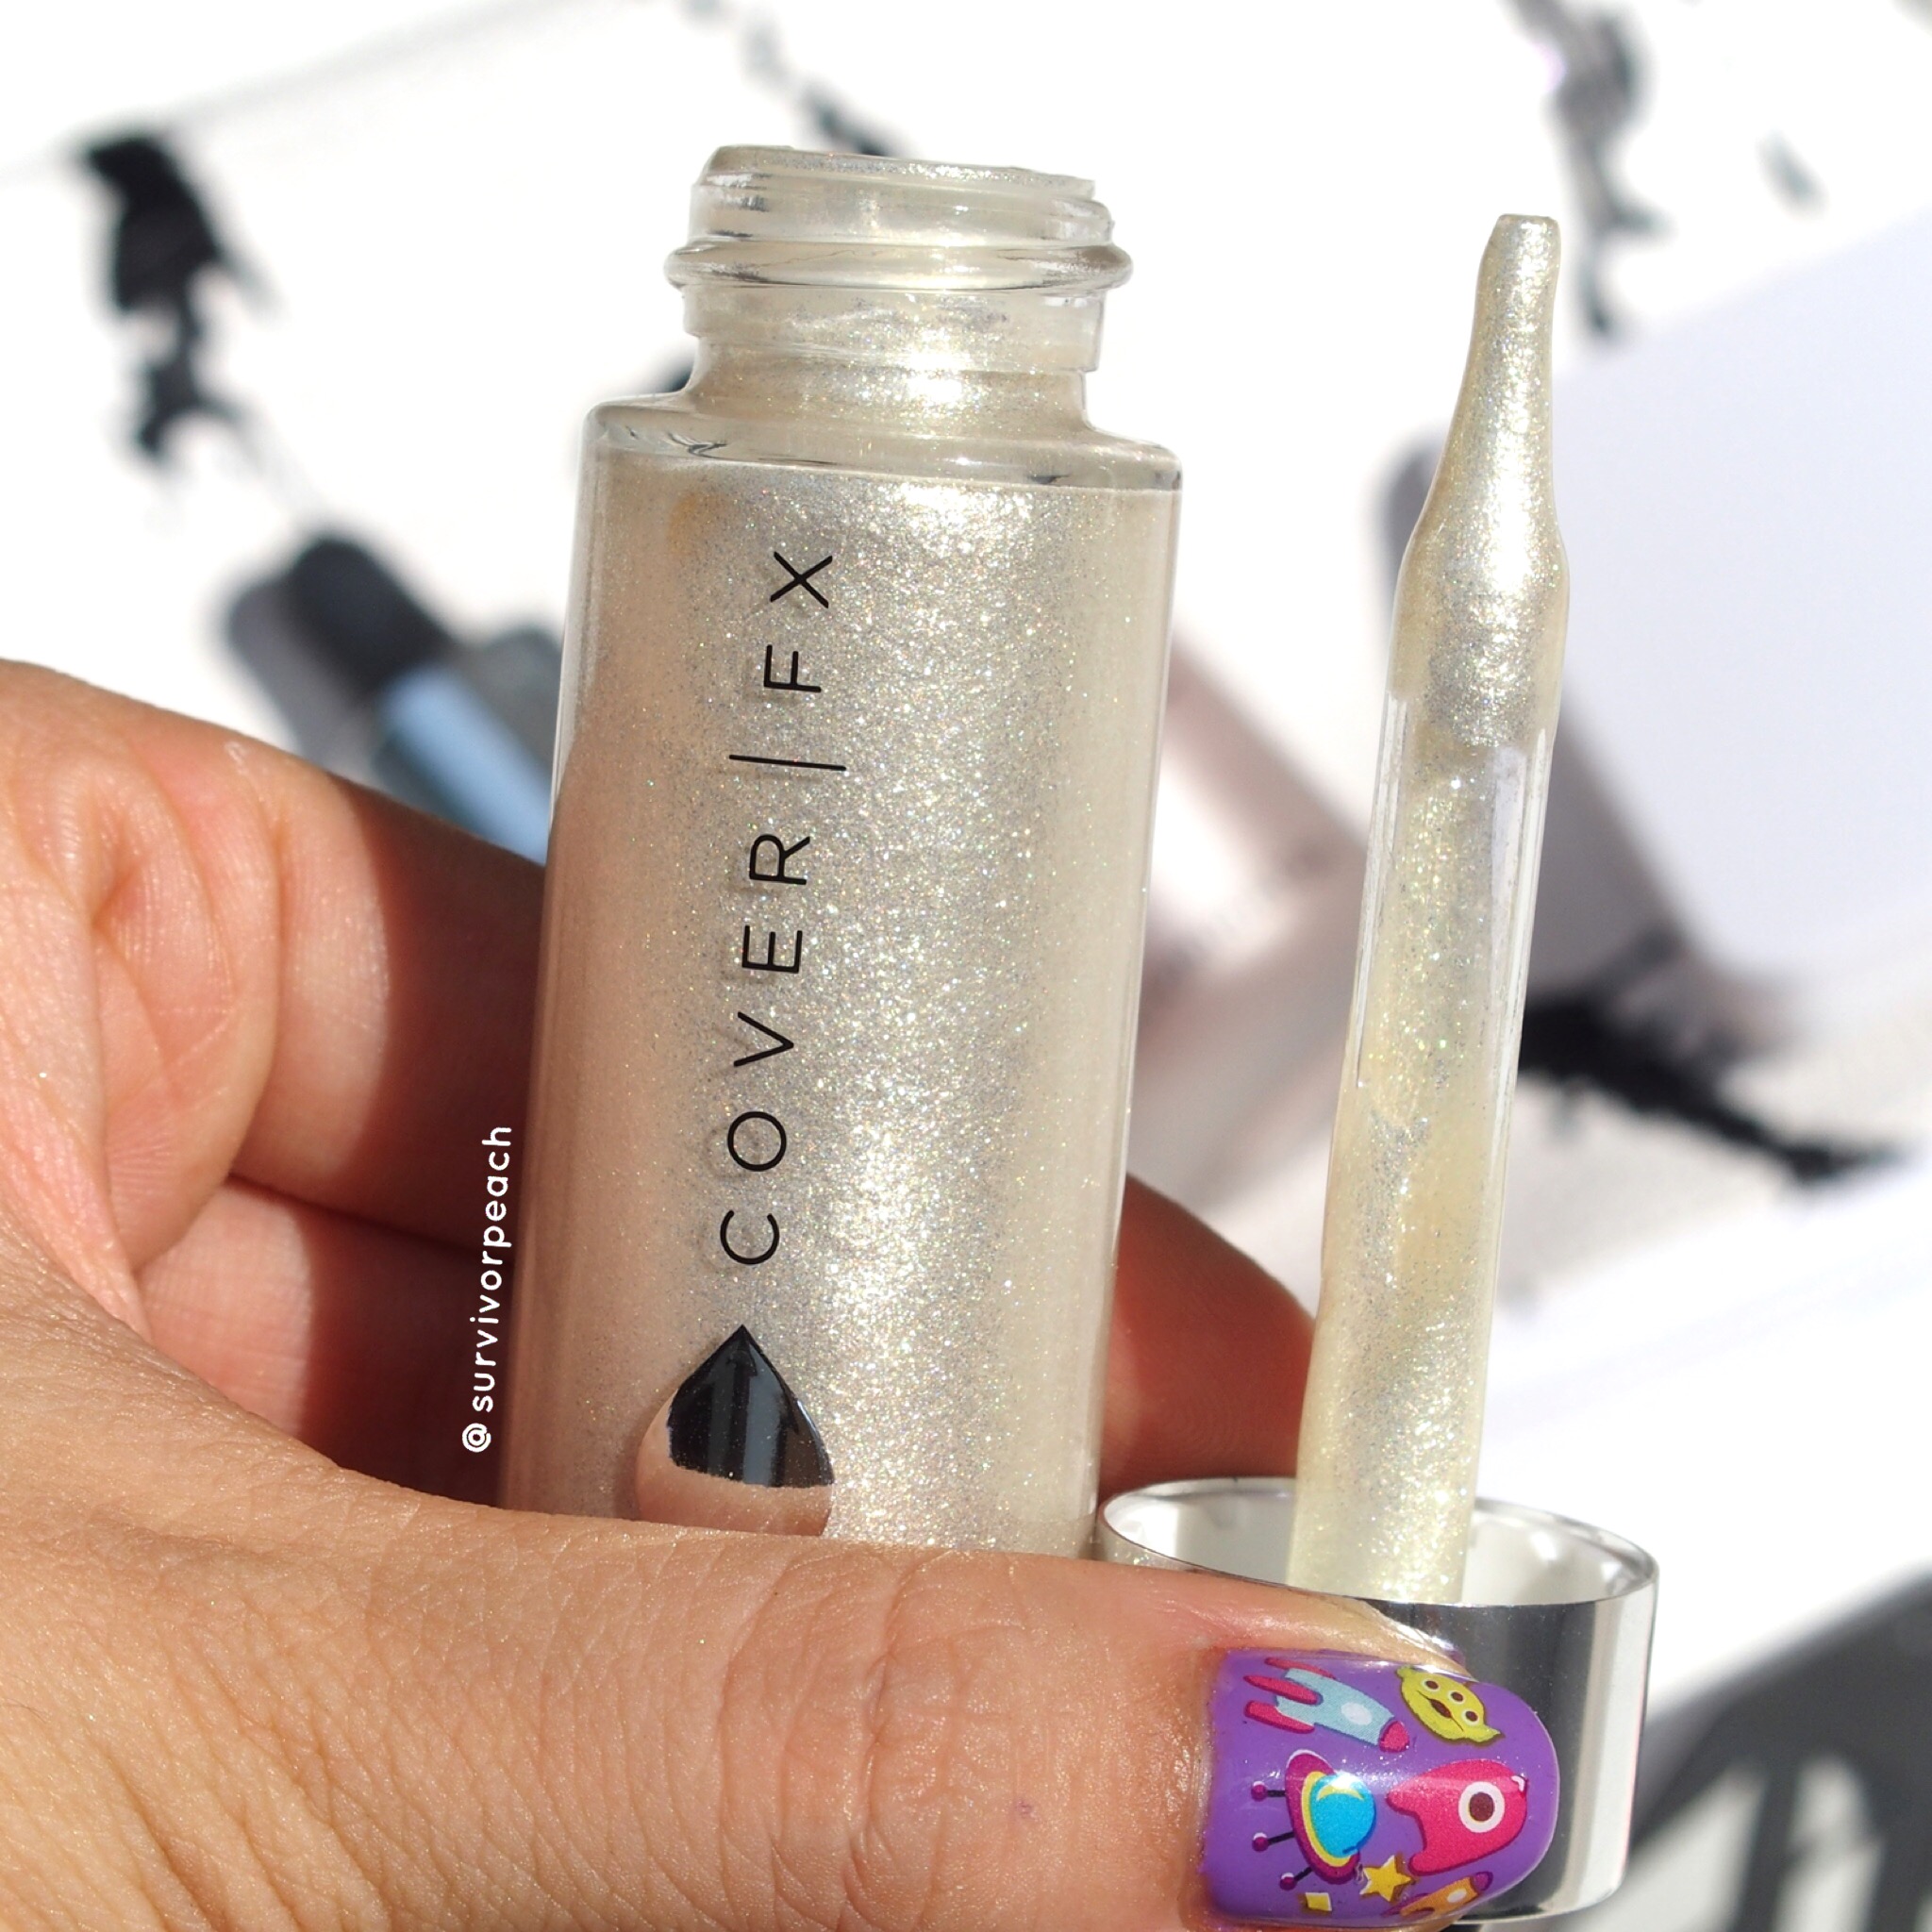 Cover FX Glitter Drops Review and —